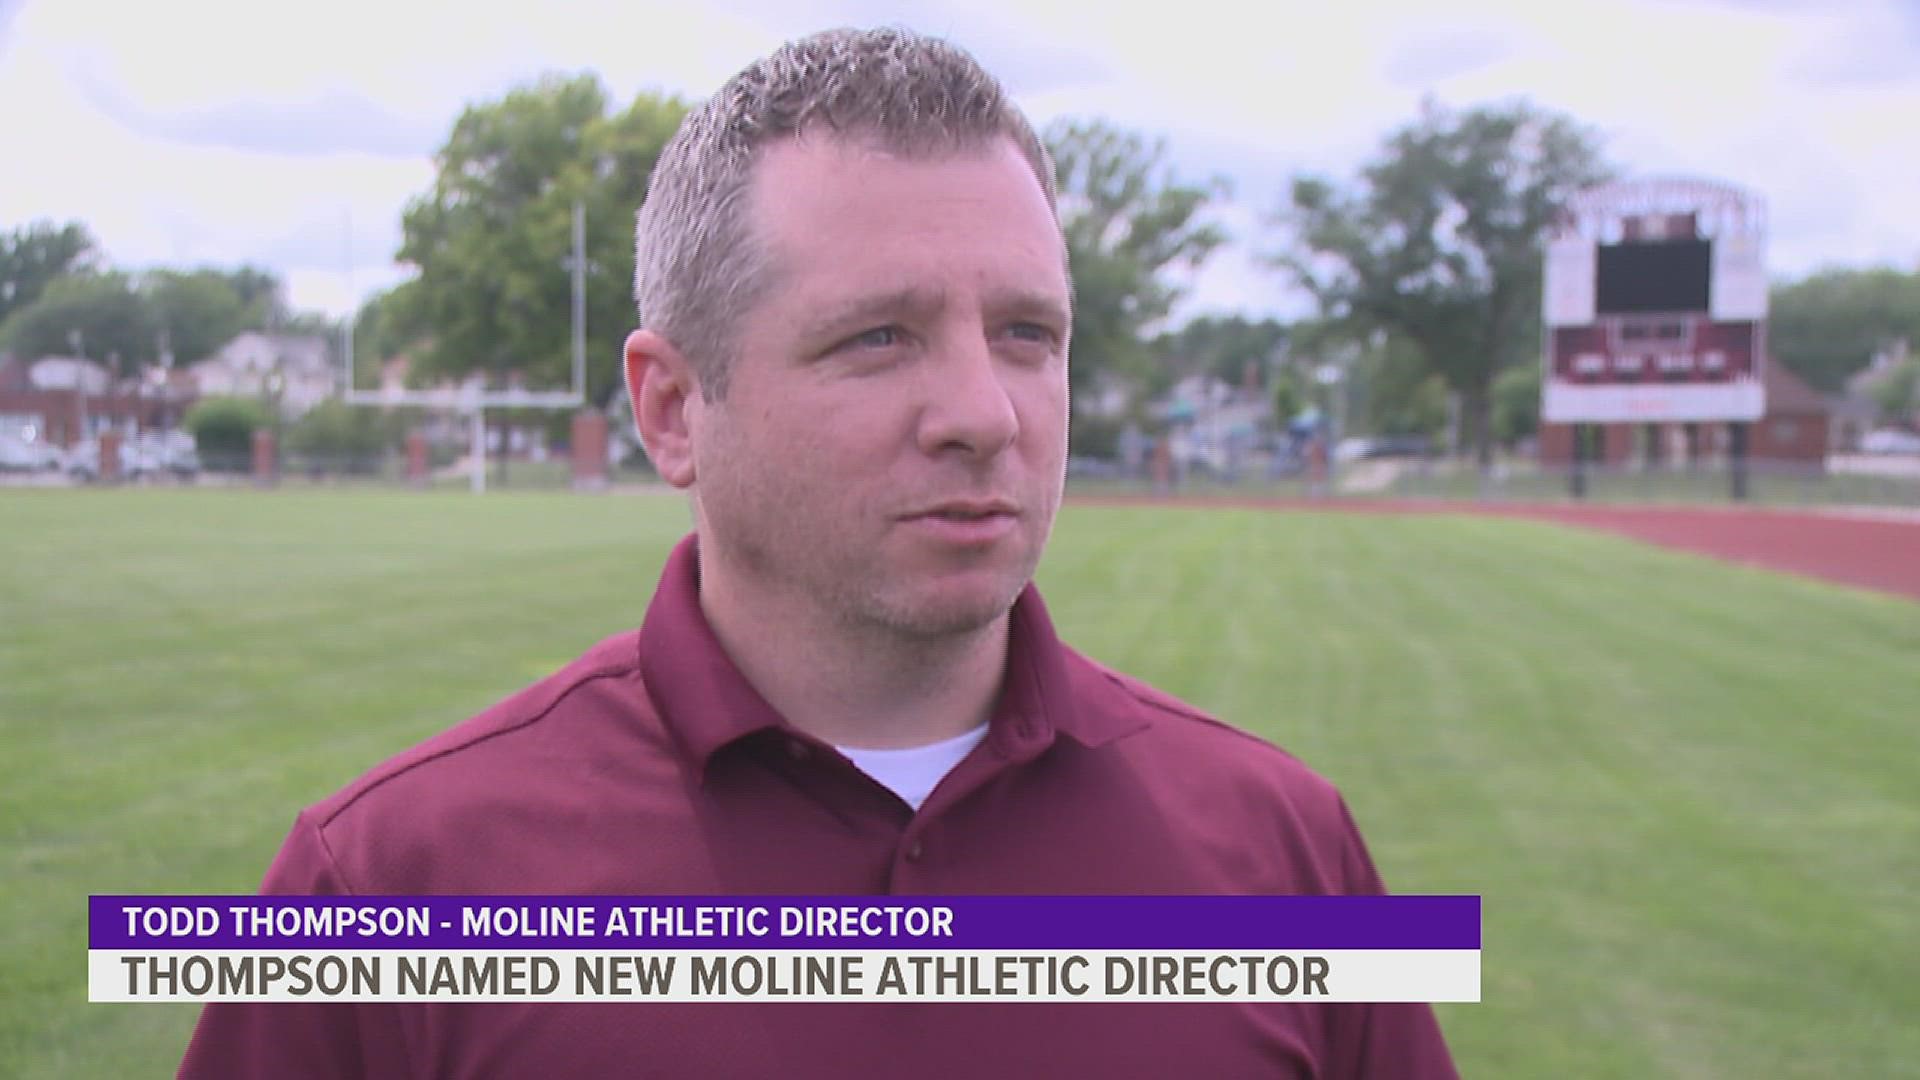 Longtime athlete, teacher and coach Todd Thompson will become athletic director at Moline High School at the beginning of the 2022-23 school year.